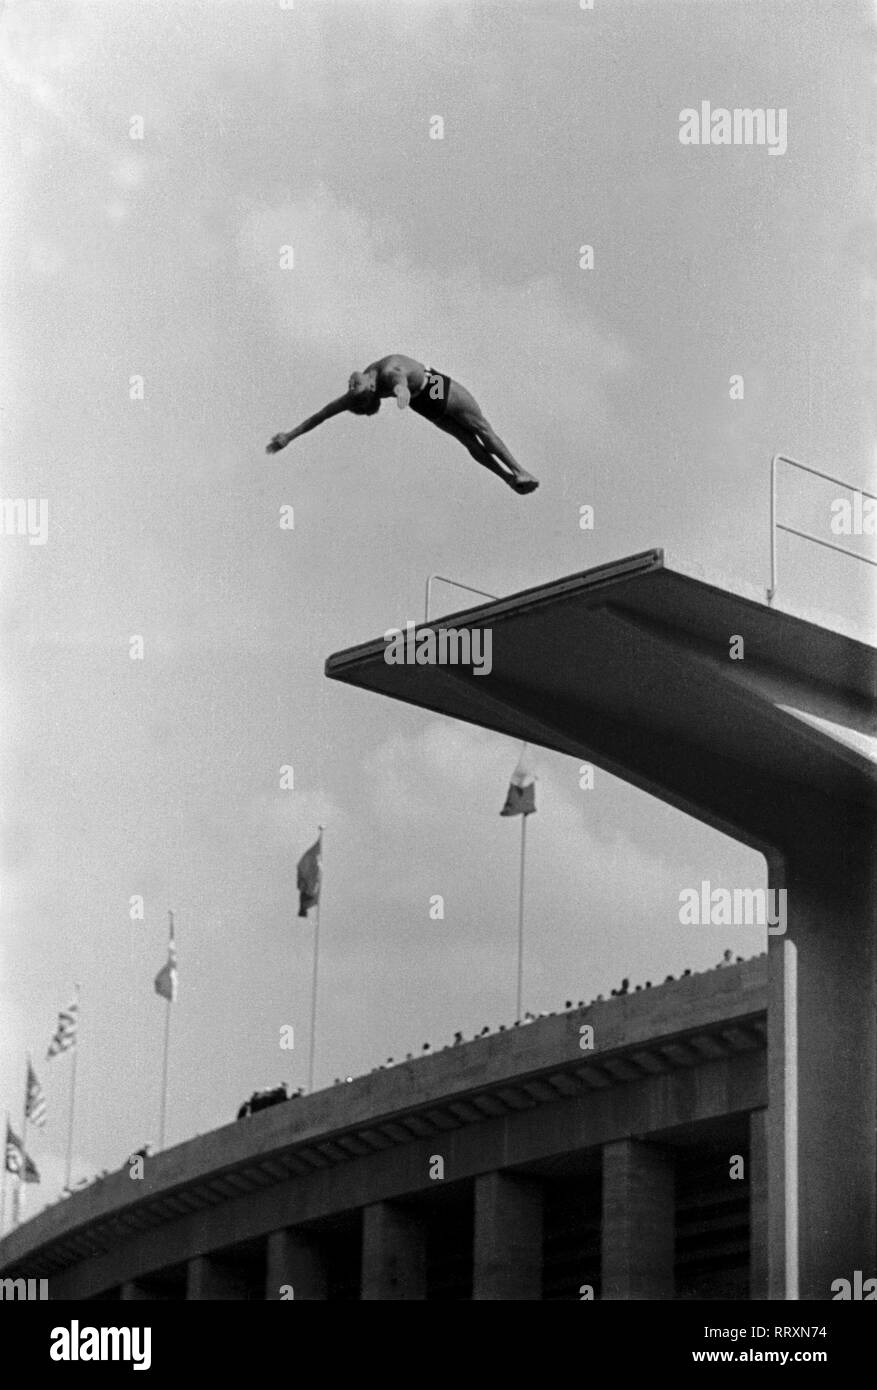 Summer Olympics 1936 - Germany, Third Reich - Olympic Games, Summer Olympics 1936 in Berlin. Men swimming competition at the swimming stadium  - platform  diver - view of the jump. Image date August 1936. Photo Erich Andres Stock Photo